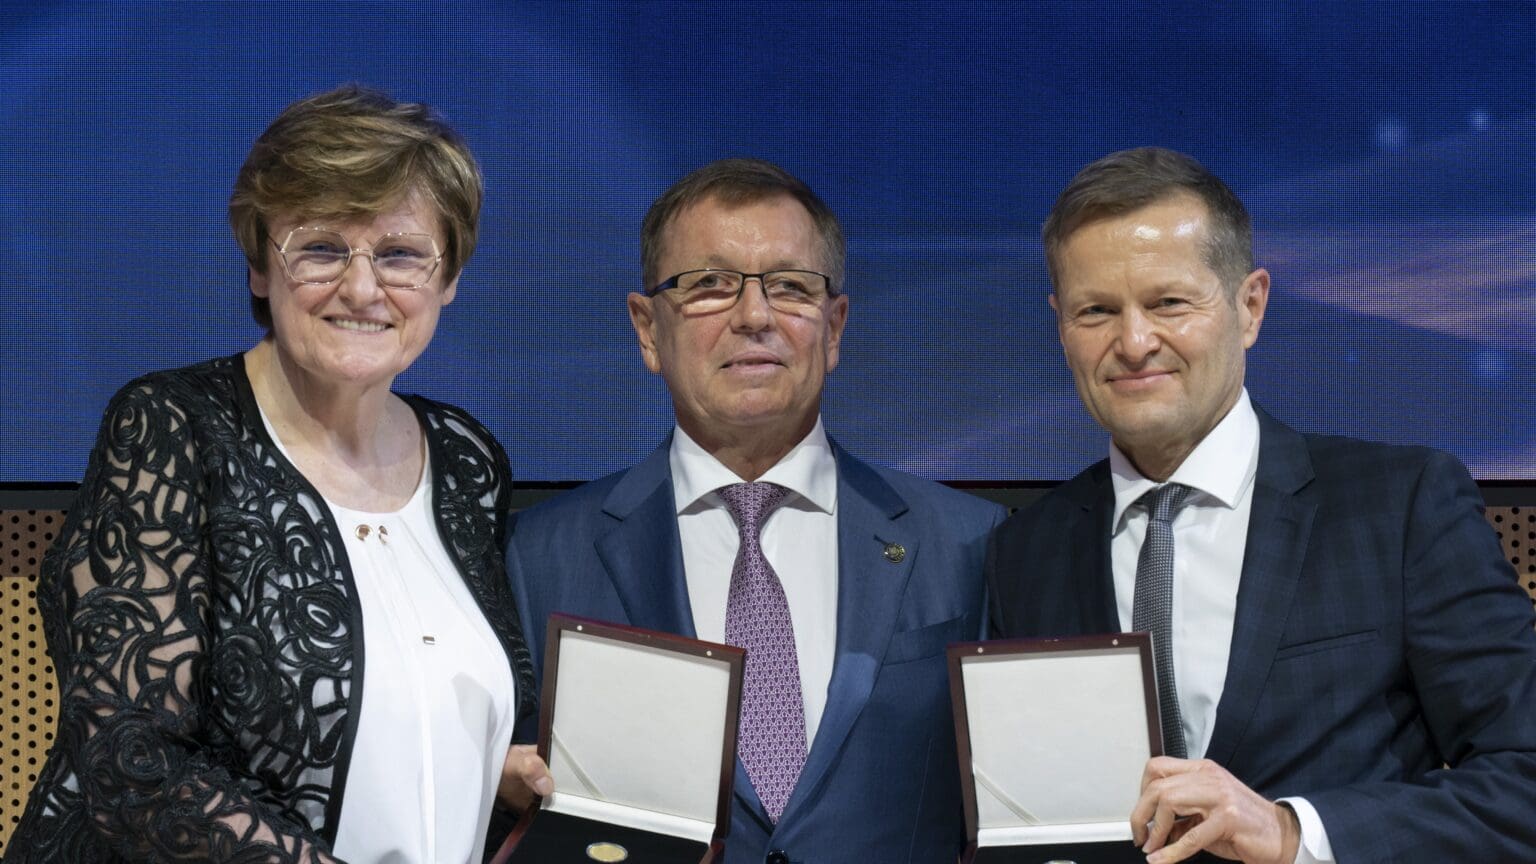 Commemorative Coins Issued for Hungarian Nobel Laureates